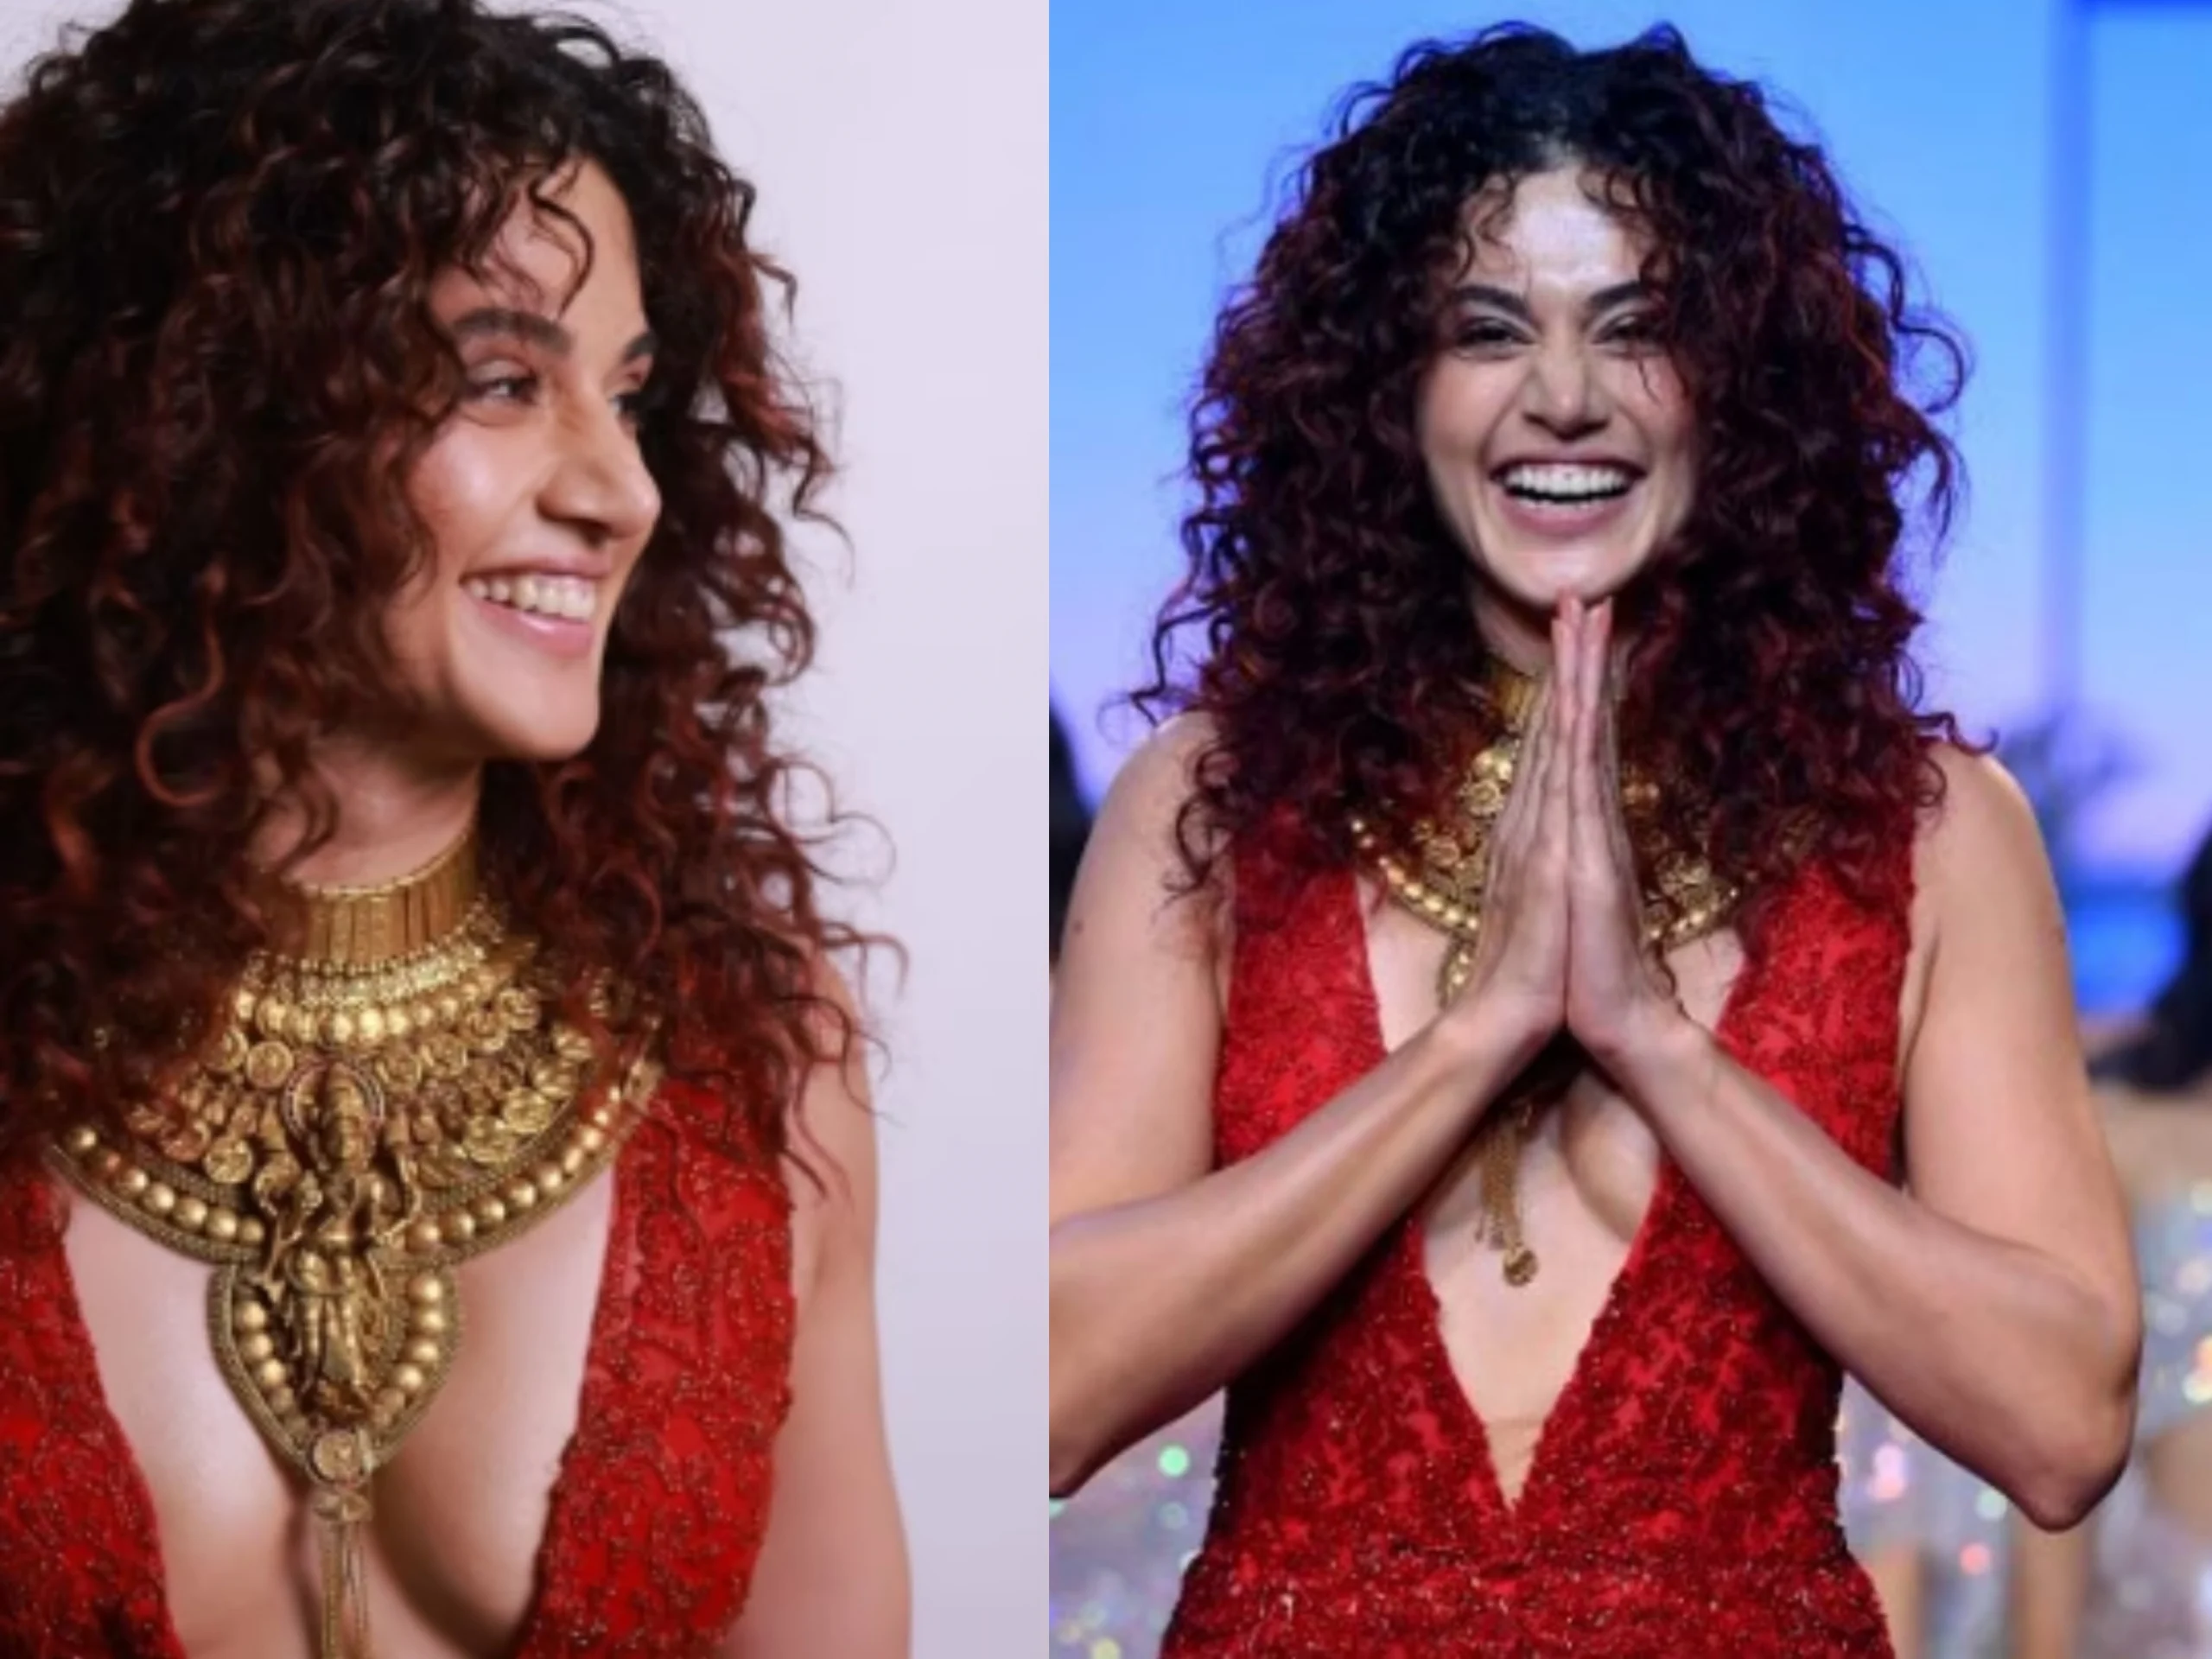 Tapsee In Legal Trouble: Case File Against The Actress For Hurting Hindu Sentiments